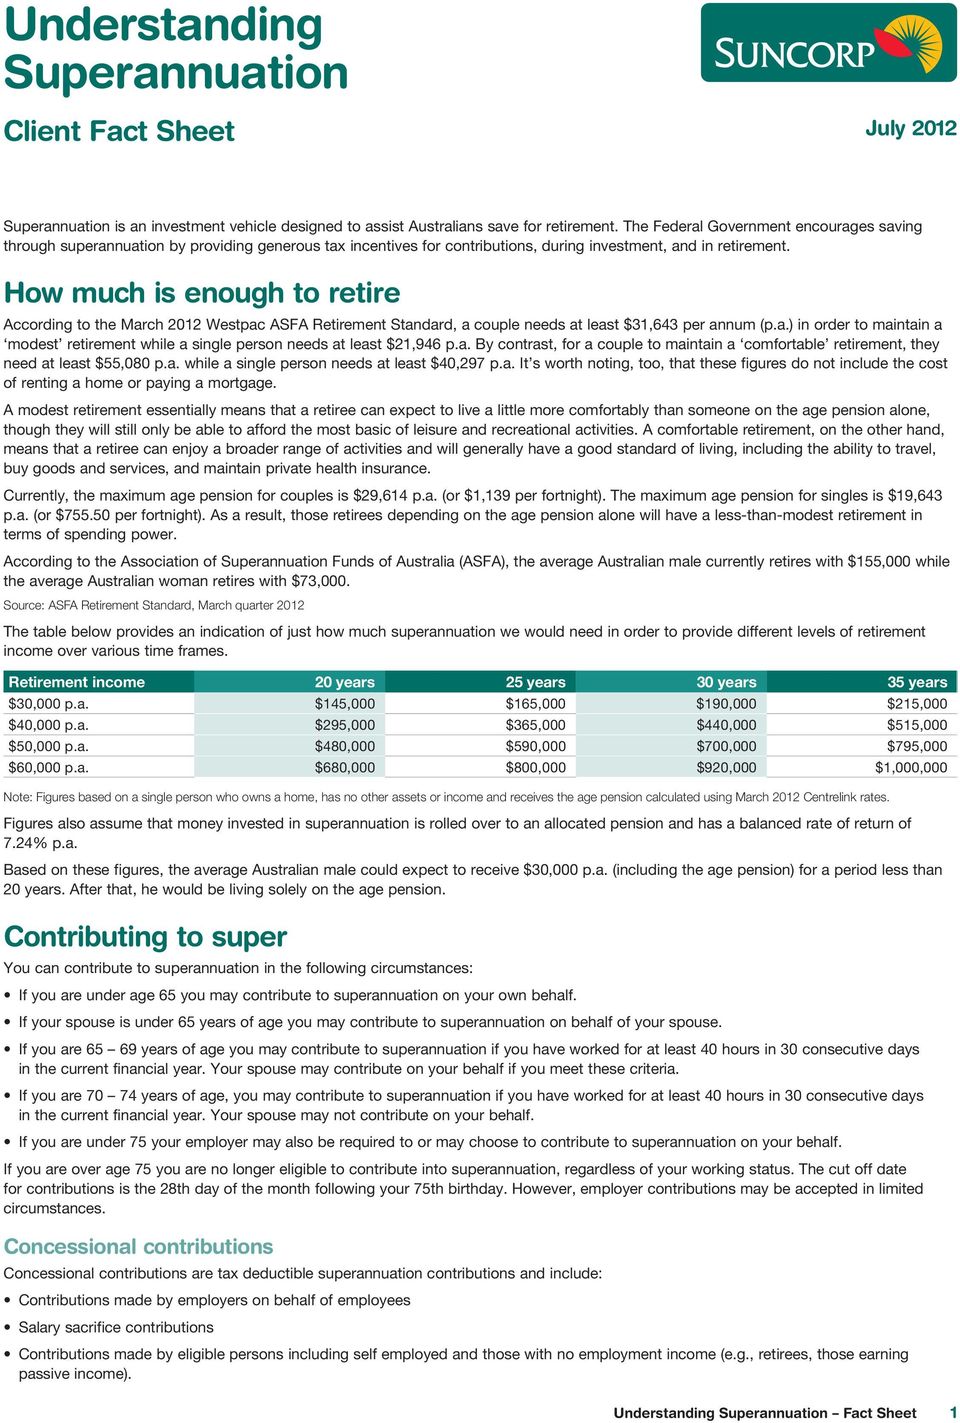 How much is enough to retire According to the March 2012 Westpac ASFA Retirement Standard, a couple needs at least $31,643 per annum (p.a.) in order to maintain a modest retirement while a single person needs at least $21,946 p.